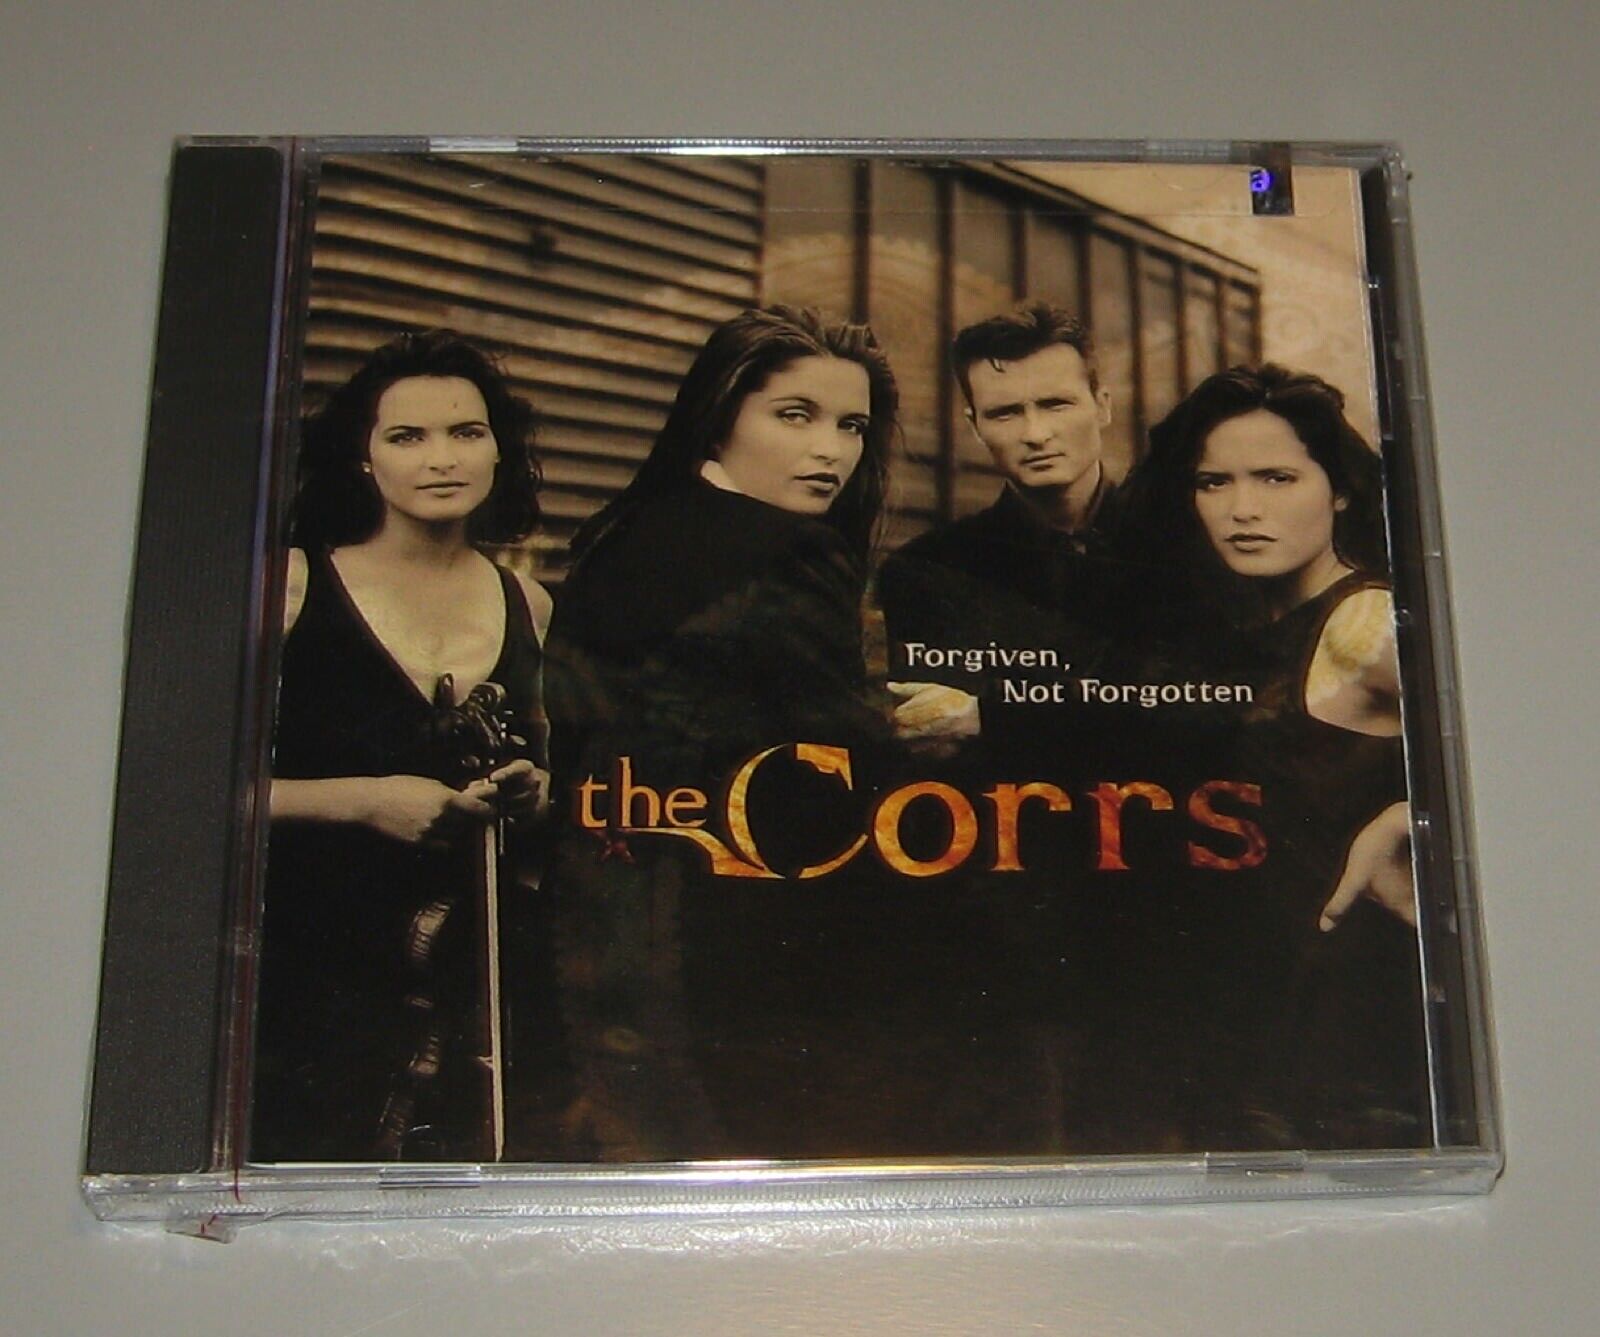 The Corrs - Forgiven, Not Fogotten (CD, 1995, 143 Records/Lava Records) Sealed